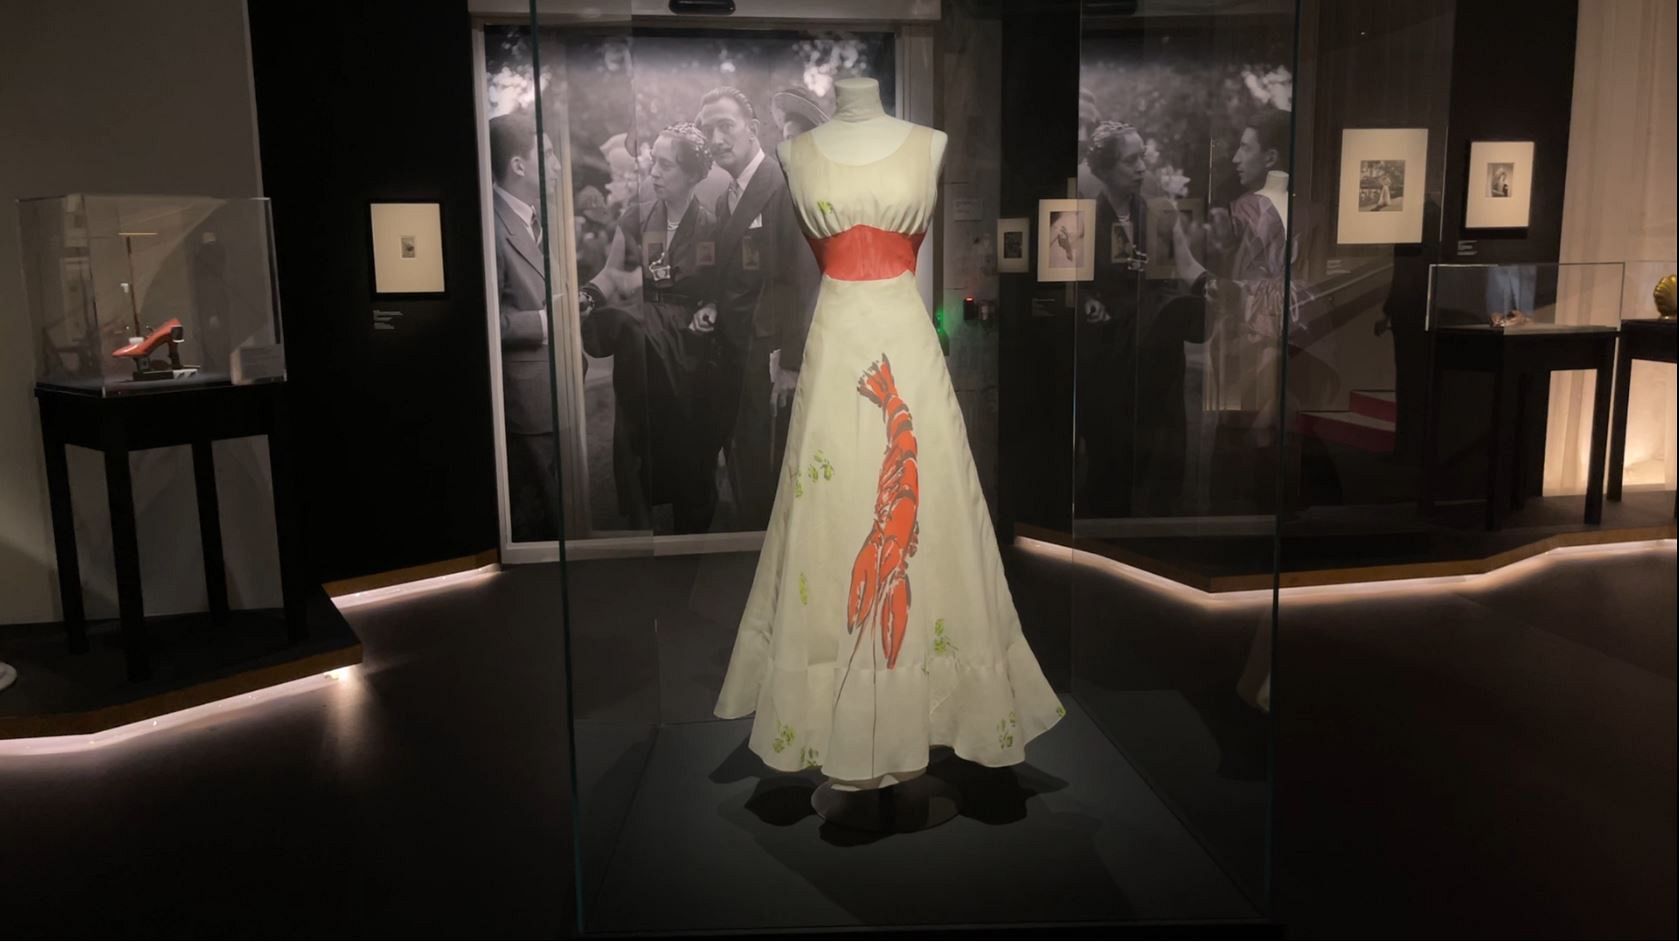 The famous lobster dress featuring a Dalí's drawing became famous after being worn by Wallis Simpson.